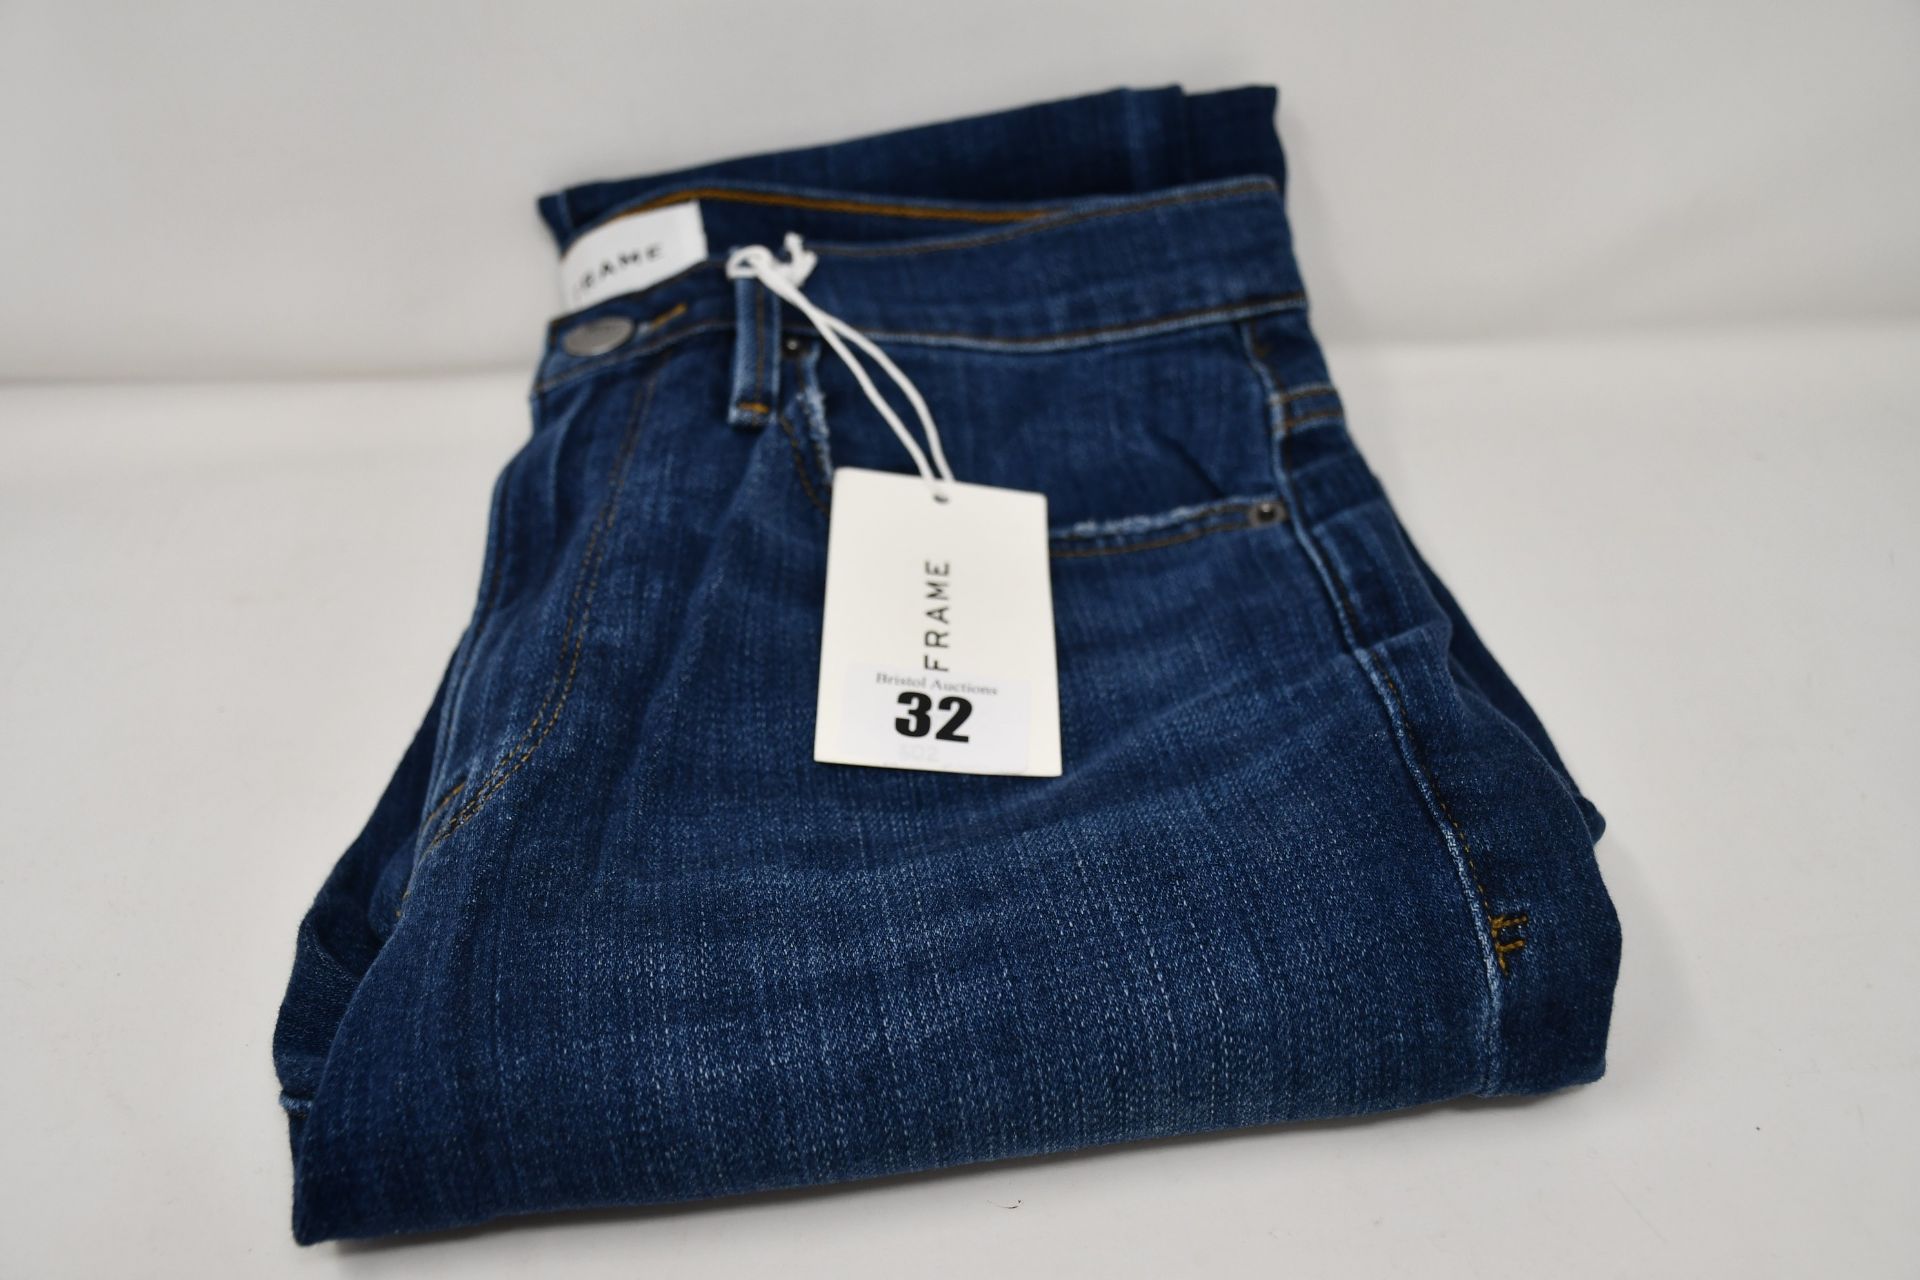 A pair of as new Frame Le Beau jeans in Burnside (Size 26).